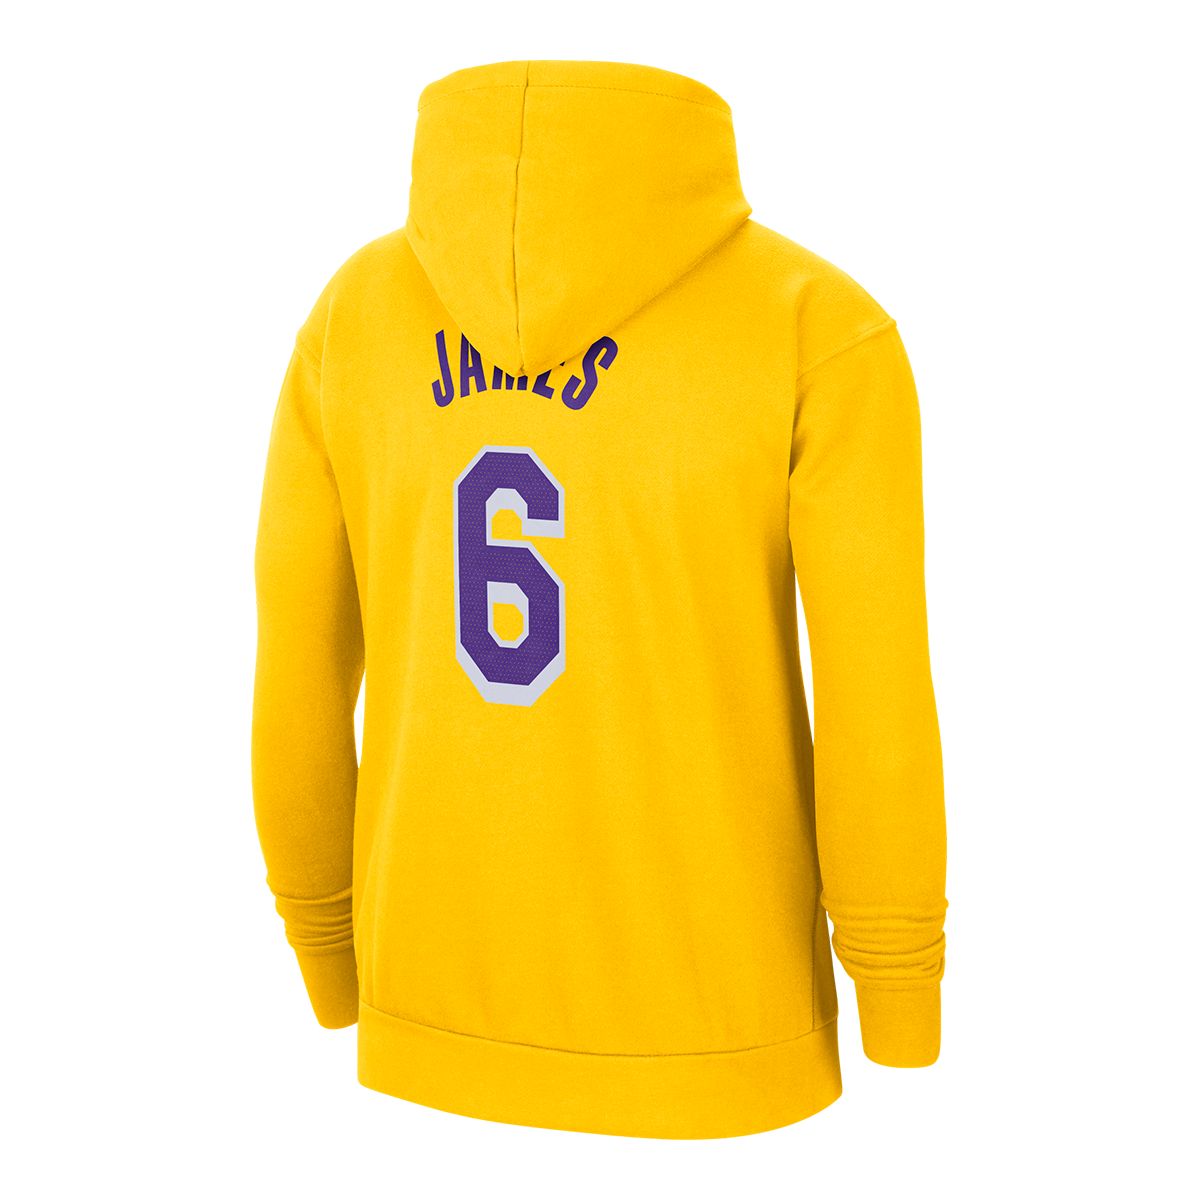 Outerstuff NBA Los Angeles Lakers LeBron James Youth Mixtape Jersey - NBA  from USA Sports UK